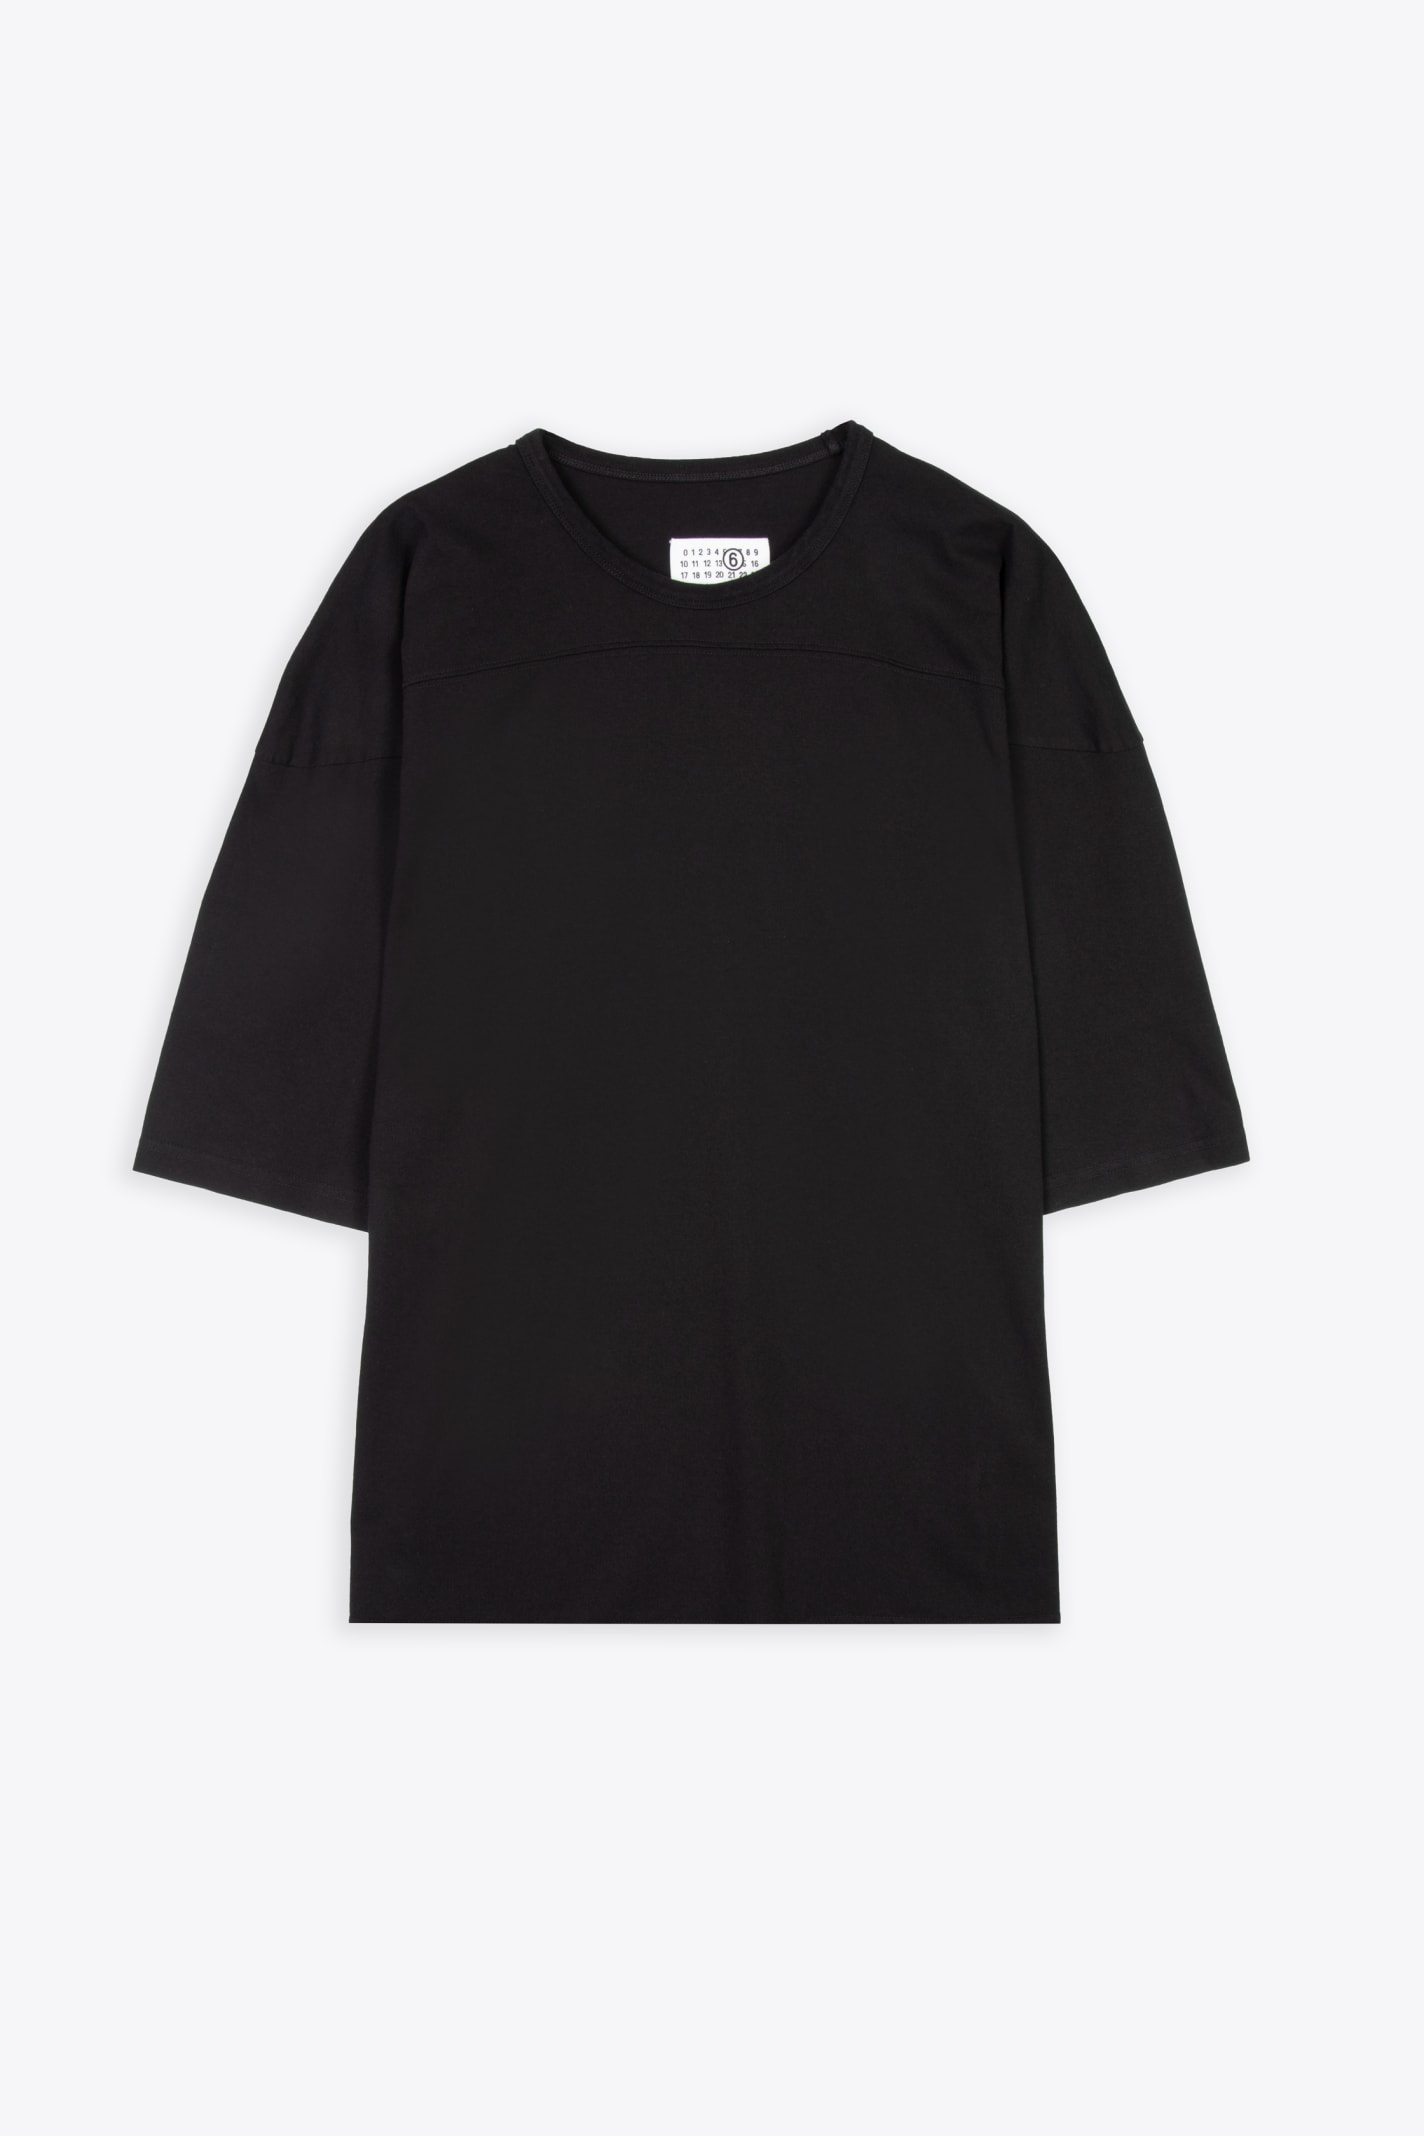 T-shirt Black Relaxed T-shirt With 3/4 Sleeves Lenght